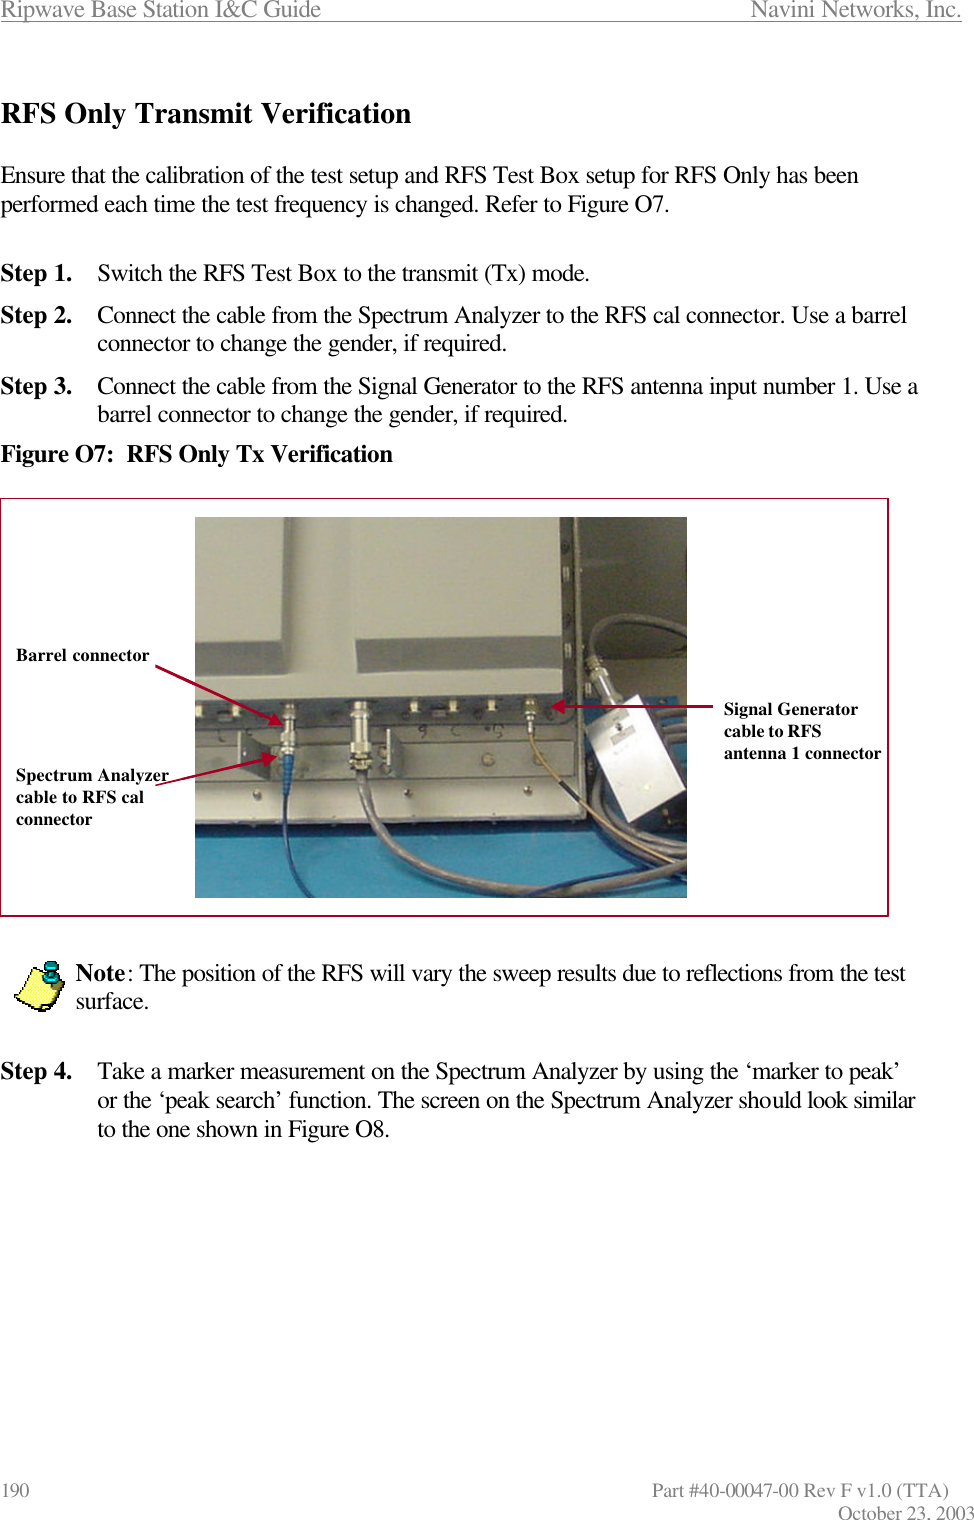 Ripwave Base Station I&amp;C Guide                      Navini Networks, Inc. 190                   Part #40-00047-00 Rev F v1.0 (TTA) October 23, 2003  RFS Only Transmit Verification  Ensure that the calibration of the test setup and RFS Test Box setup for RFS Only has been performed each time the test frequency is changed. Refer to Figure O7.  Step 1. Switch the RFS Test Box to the transmit (Tx) mode. Step 2. Connect the cable from the Spectrum Analyzer to the RFS cal connector. Use a barrel connector to change the gender, if required. Step 3. Connect the cable from the Signal Generator to the RFS antenna input number 1. Use a barrel connector to change the gender, if required. Figure O7:  RFS Only Tx Verification                  Note: The position of the RFS will vary the sweep results due to reflections from the test surface.    Step 4. Take a marker measurement on the Spectrum Analyzer by using the ‘marker to peak’ or the ‘peak search’ function. The screen on the Spectrum Analyzer should look similar to the one shown in Figure O8.          Barrel connector Signal Generator cable to RFS antenna 1 connector Spectrum Analyzer cable to RFS cal connector Barrel connector Signal Generator cable to RFS antenna 1 connector Spectrum Analyzer cable to RFS cal connector 